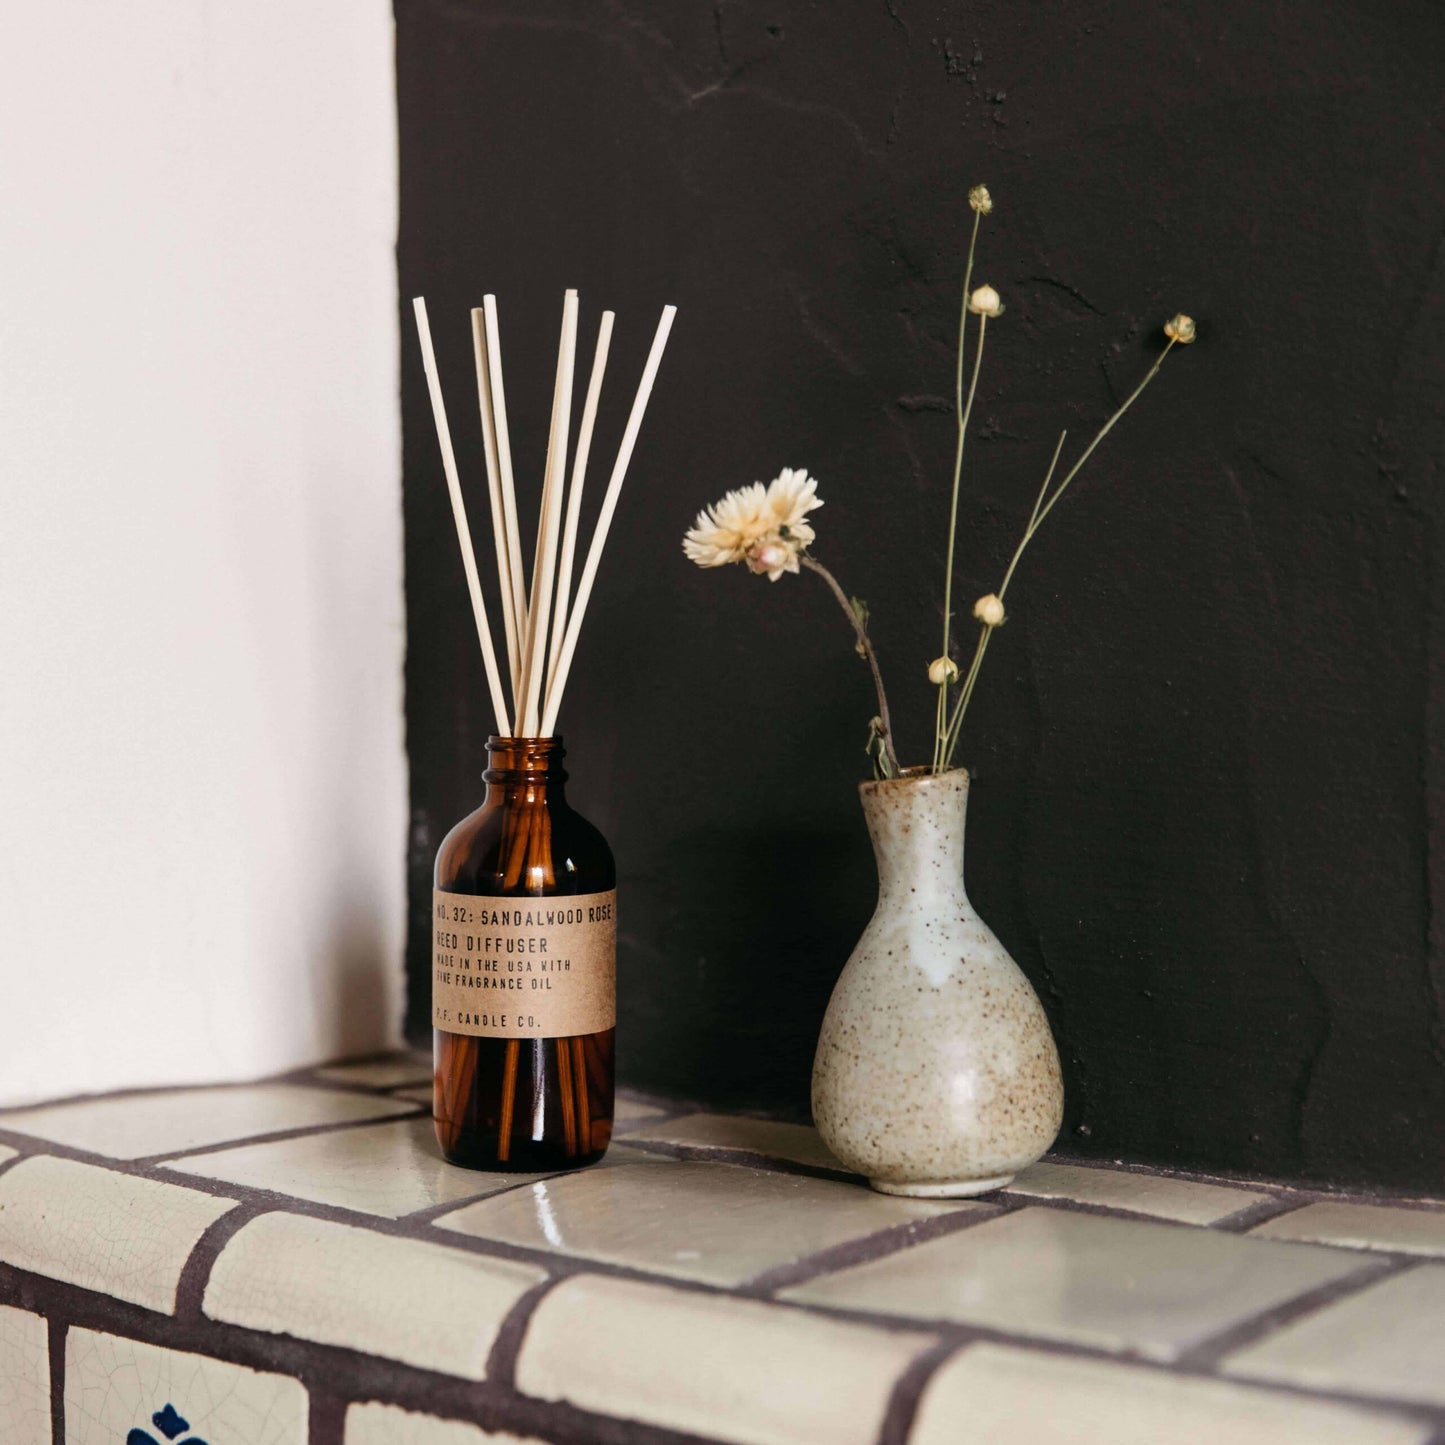 Sandalwood Rose Reed Diffuser by P.F. Candle Co.